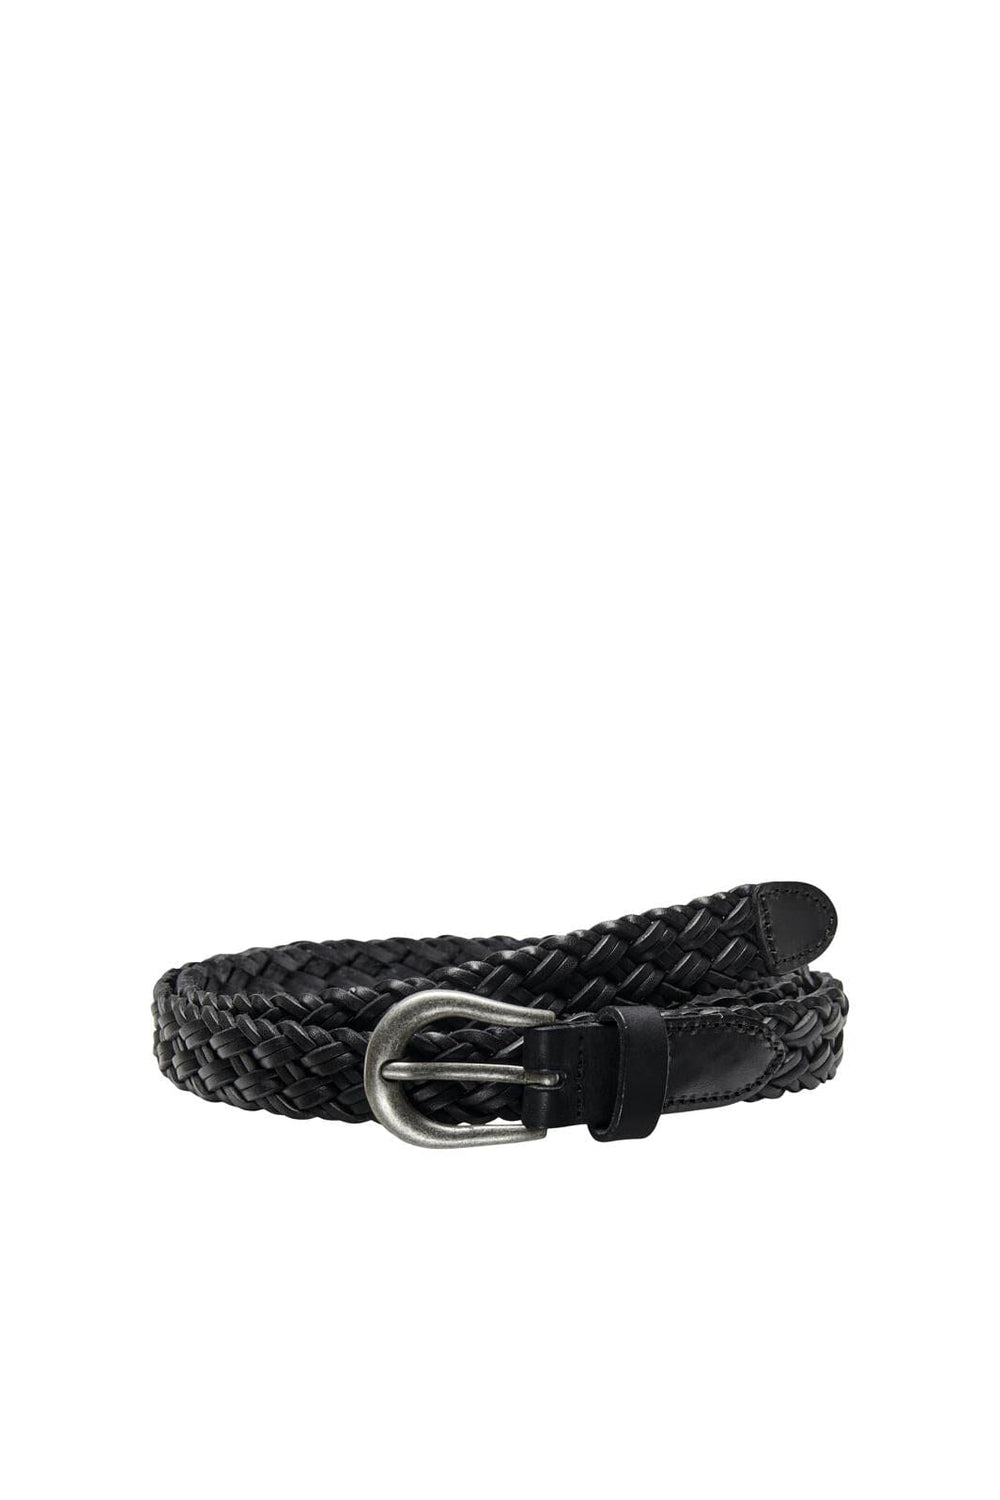 Only - Onlhanna Braided Leather Jeans Belt - 4130196 Black Antique Silver Metal